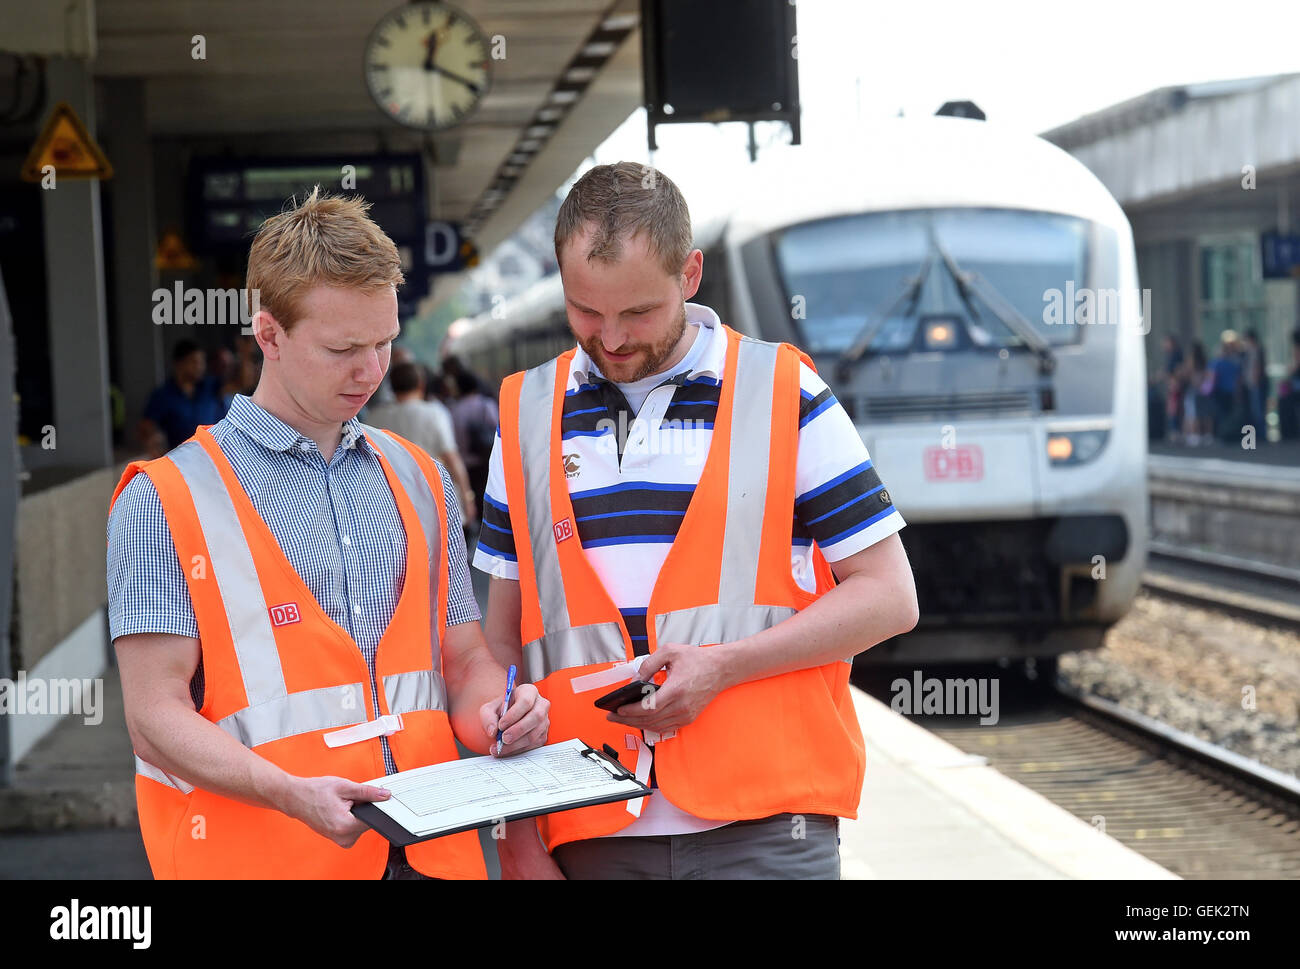 Hanover, Germany. 22nd July, 2016. Deutsche Bahn hub coordinators Florian Czeski and Kay Doerries (L-R) document the arrival and departure times of IC and ICE trains on a platform at the central train station in Hanover, Germany, 22 July 2016. Photo: Holger Hollemann/dpa/Alamy Live News Stock Photo